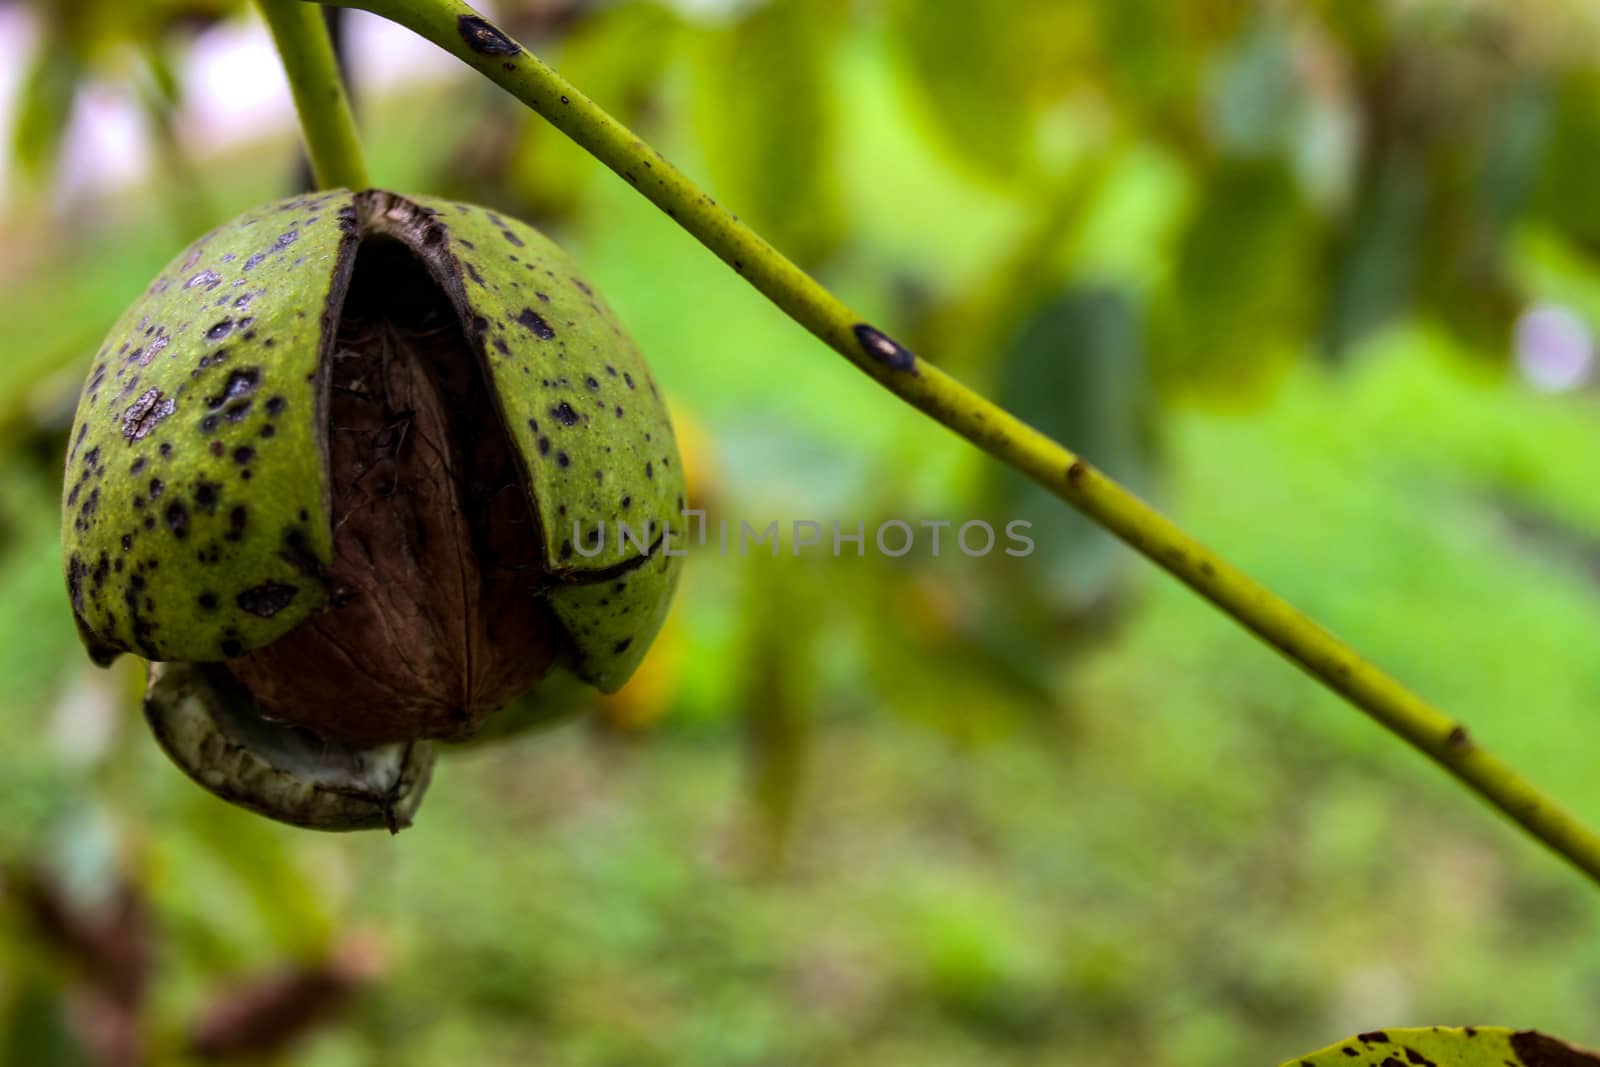 A ripe walnut protruding from a cracked green shell. by mahirrov